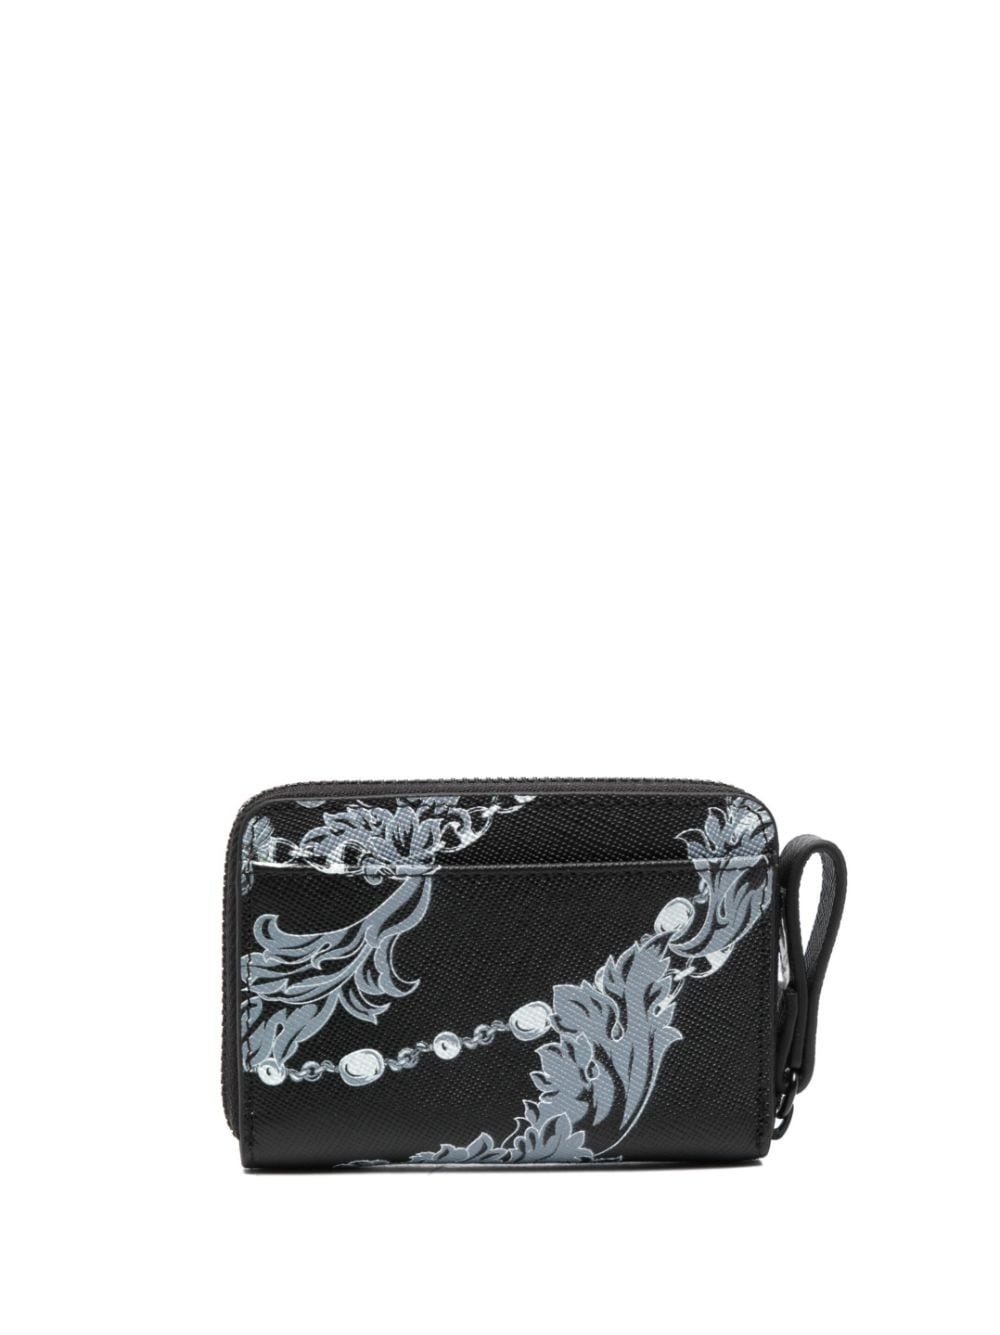 baroque-pattern leather wallet - 2